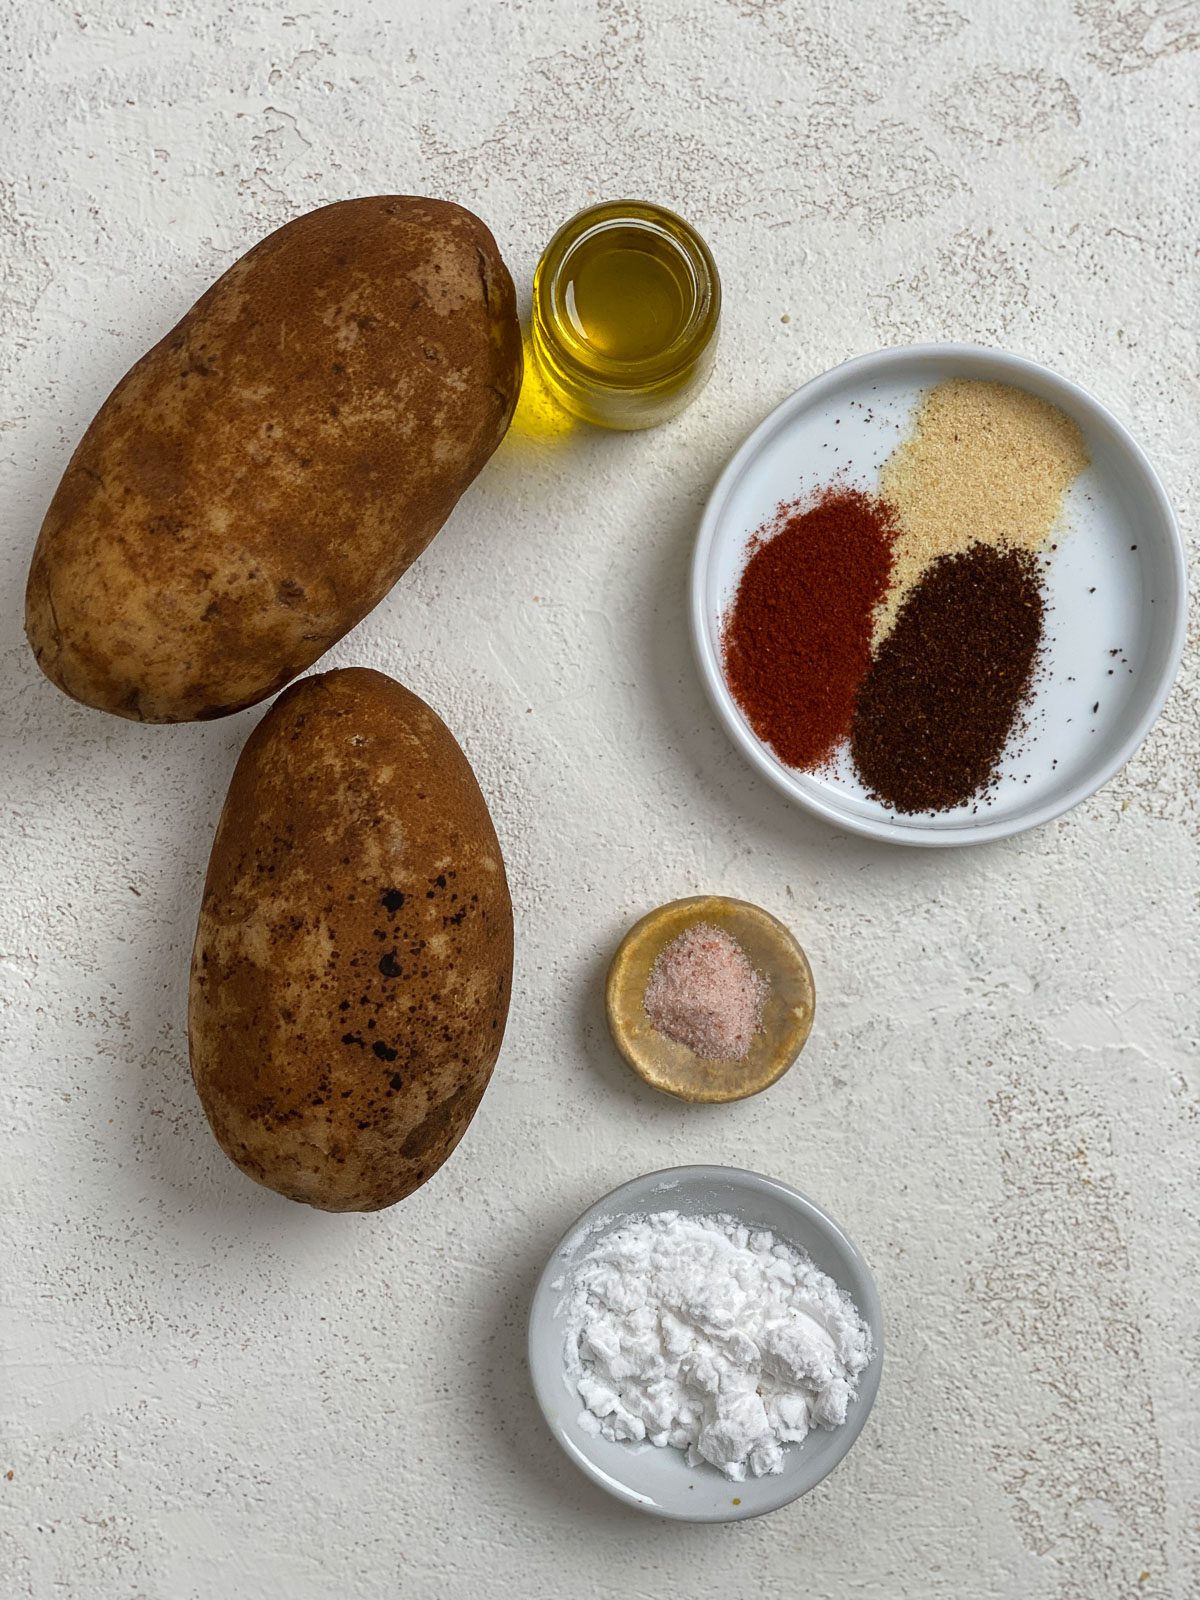 ingredients for air fryer potato wedges against a white surface